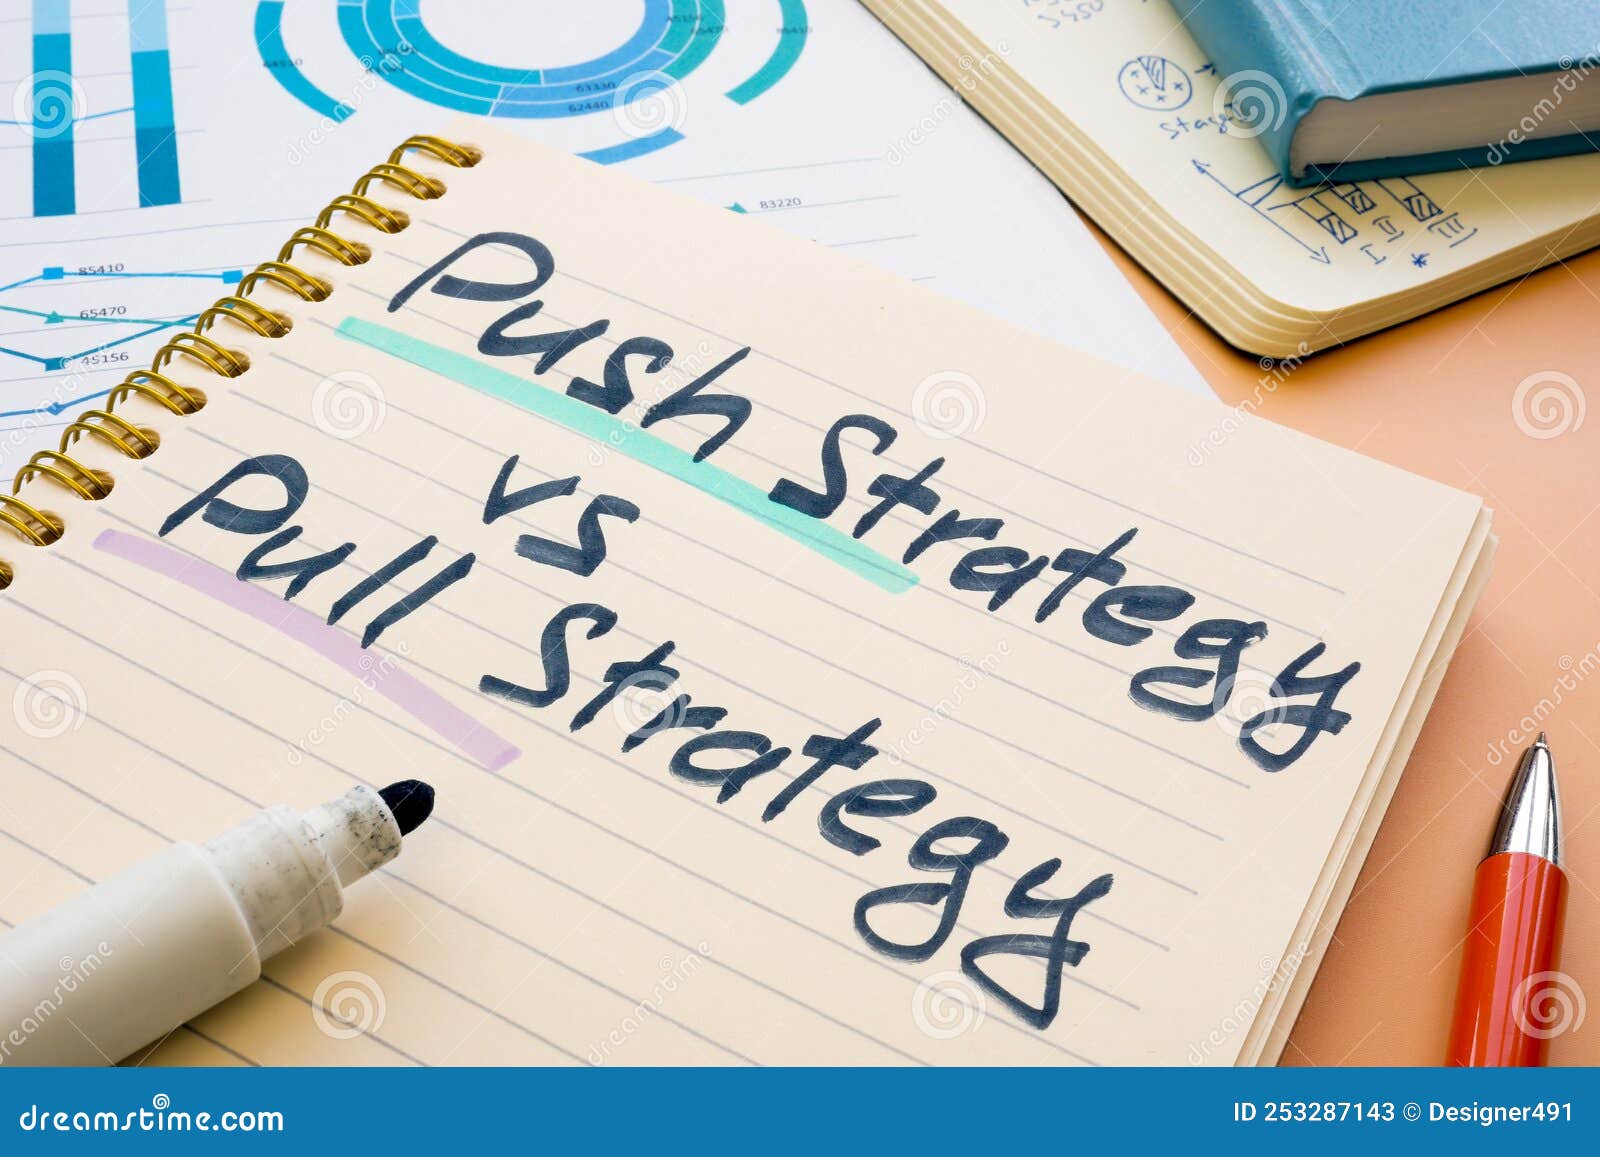 push strategy vs pull strategy phrase in the notebook.